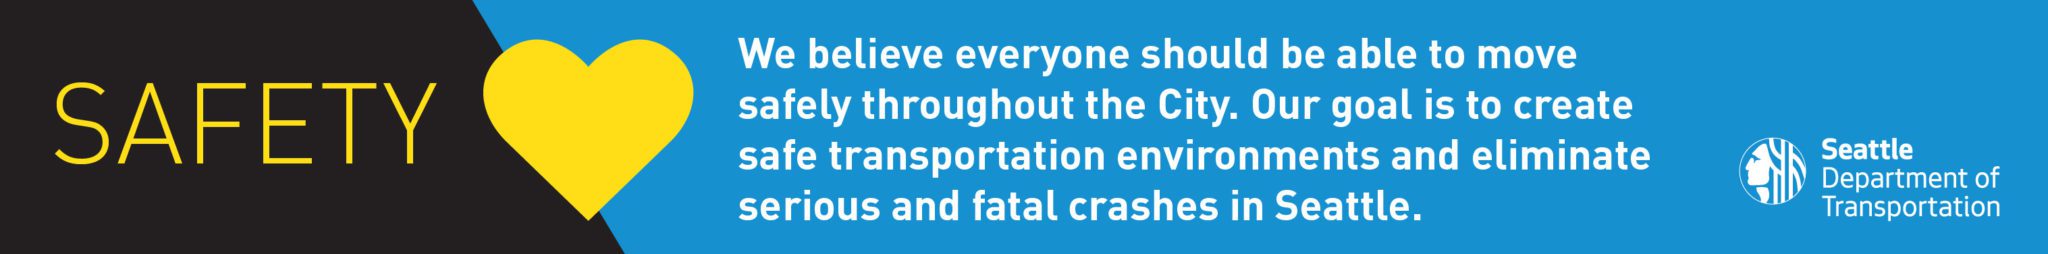 Safety is one of SDOT's core values and goals.